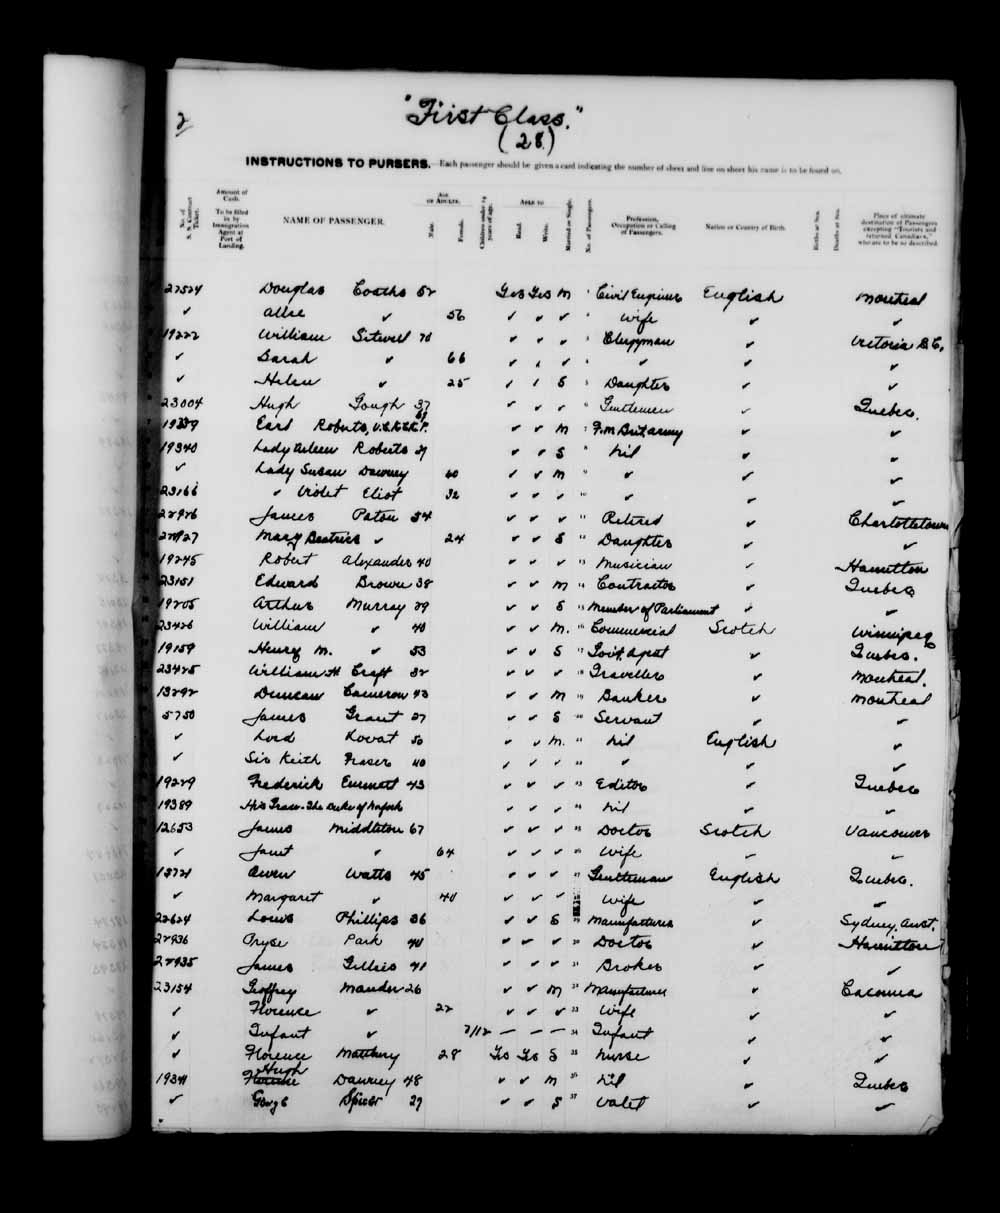 Digitized page of Quebec Passenger Lists for Image No.: e003591279